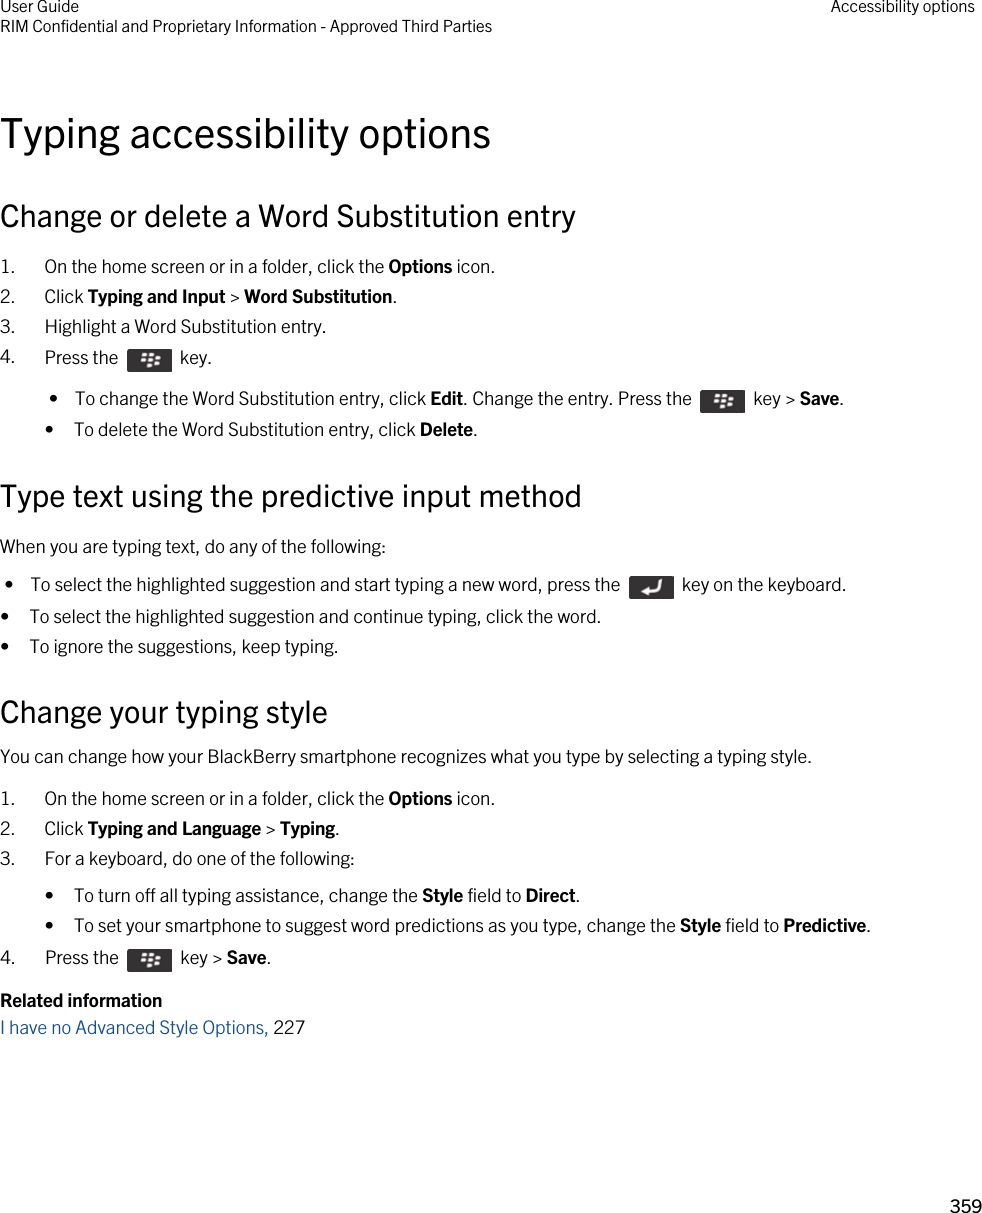 Typing accessibility optionsChange or delete a Word Substitution entry1. On the home screen or in a folder, click the Options icon.2. Click Typing and Input &gt; Word Substitution.3. Highlight a Word Substitution entry.4. Press the    key.  •  To change the Word Substitution entry, click Edit. Change the entry. Press the    key &gt; Save.• To delete the Word Substitution entry, click Delete.Type text using the predictive input methodWhen you are typing text, do any of the following: •  To select the highlighted suggestion and start typing a new word, press the    key on the keyboard.• To select the highlighted suggestion and continue typing, click the word.• To ignore the suggestions, keep typing.Change your typing styleYou can change how your BlackBerry smartphone recognizes what you type by selecting a typing style.1. On the home screen or in a folder, click the Options icon.2. Click Typing and Language &gt; Typing.3. For a keyboard, do one of the following:• To turn off all typing assistance, change the Style field to Direct.• To set your smartphone to suggest word predictions as you type, change the Style field to Predictive.4.  Press the    key &gt; Save. Related informationI have no Advanced Style Options, 227 User GuideRIM Confidential and Proprietary Information - Approved Third Parties Accessibility options359 